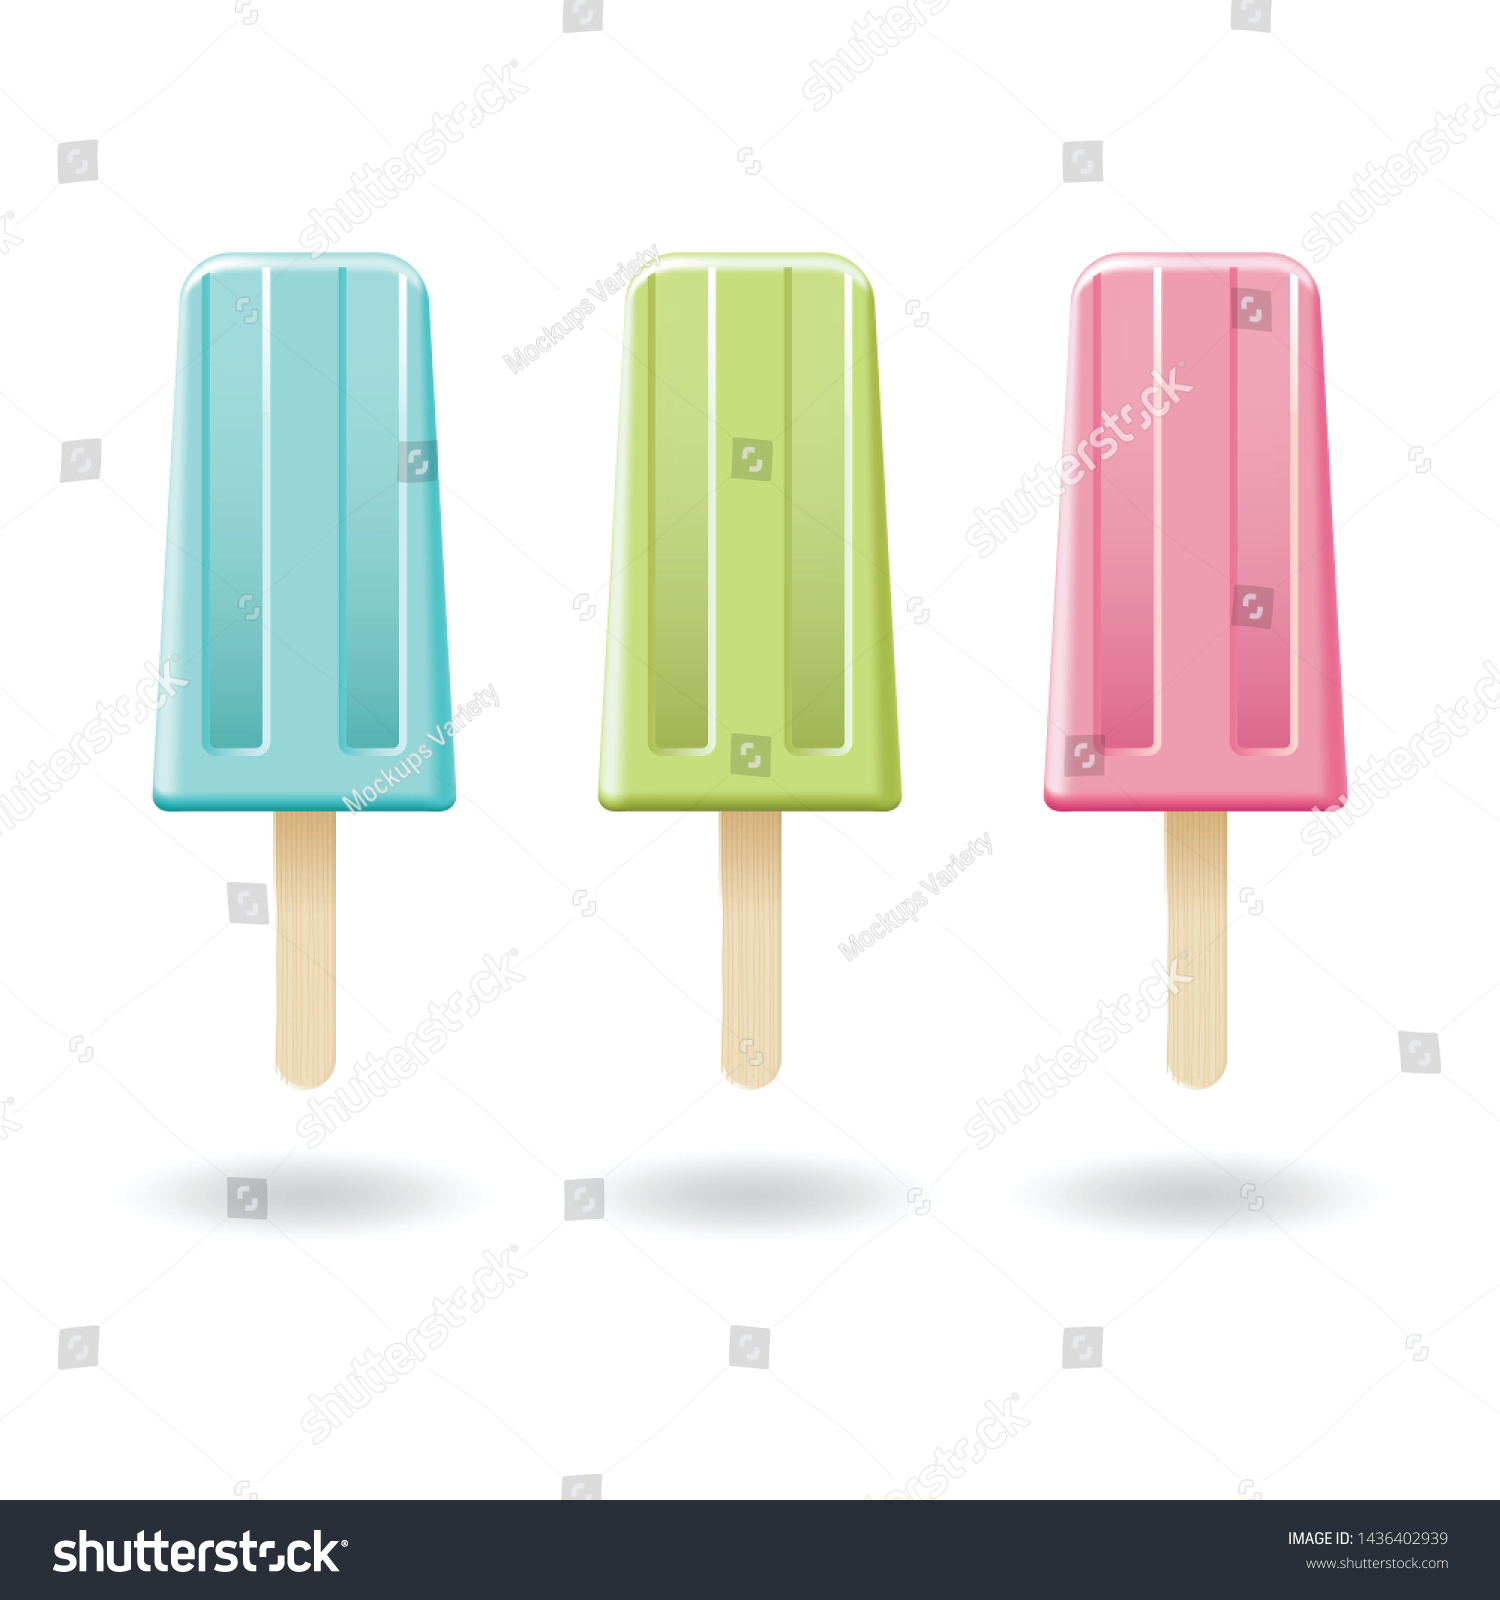 Download Blue Mint Green Lemon Pink Strawberry Stock Vector Royalty Free 1436402939